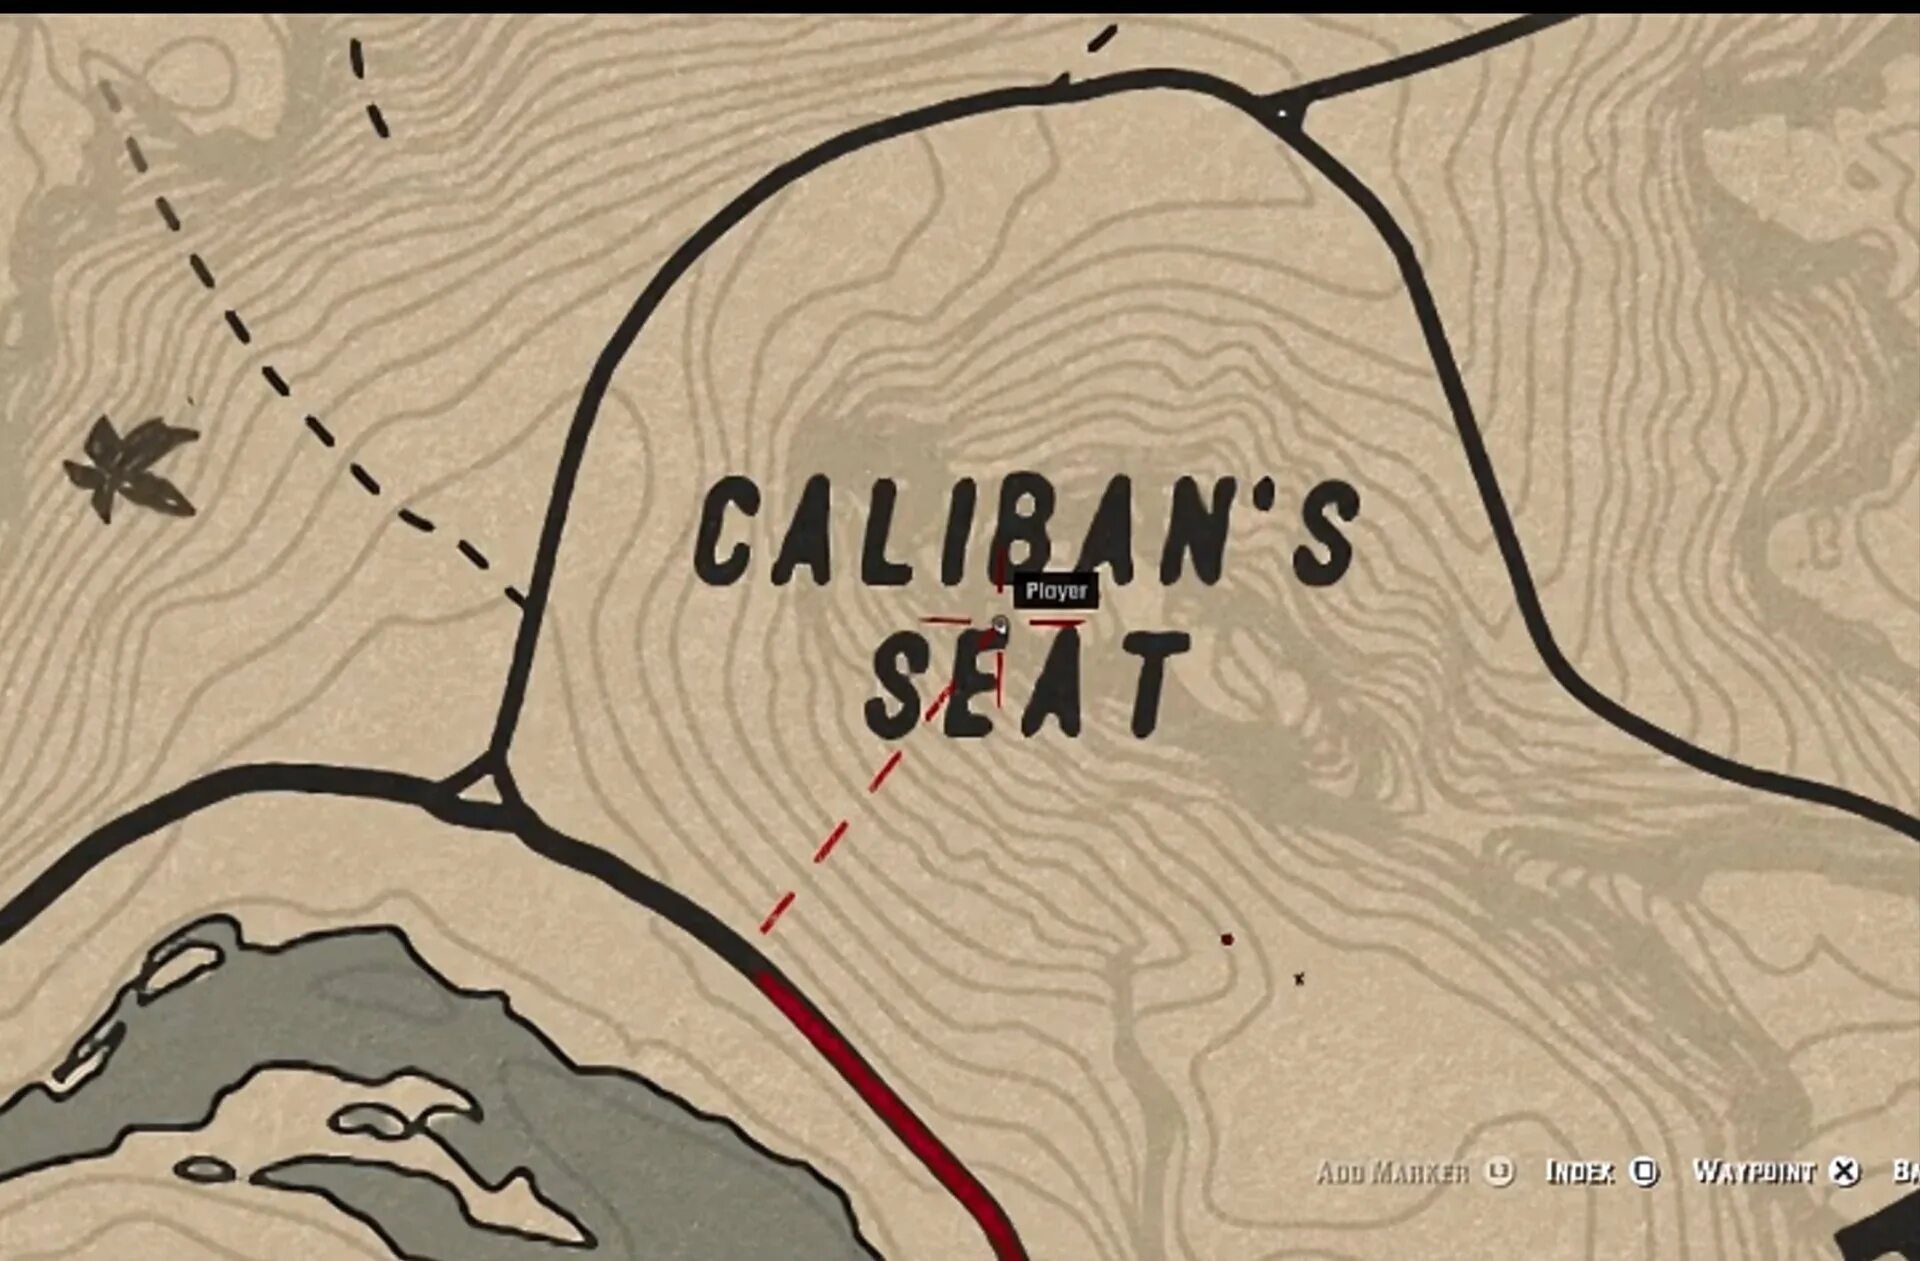 Red Dead Redemption 2 карта сокровищ Джека холла. Caliban s Seat rdr 2. Rdr2 gang Map. Rdr 2 карта сокровищ поле боя.